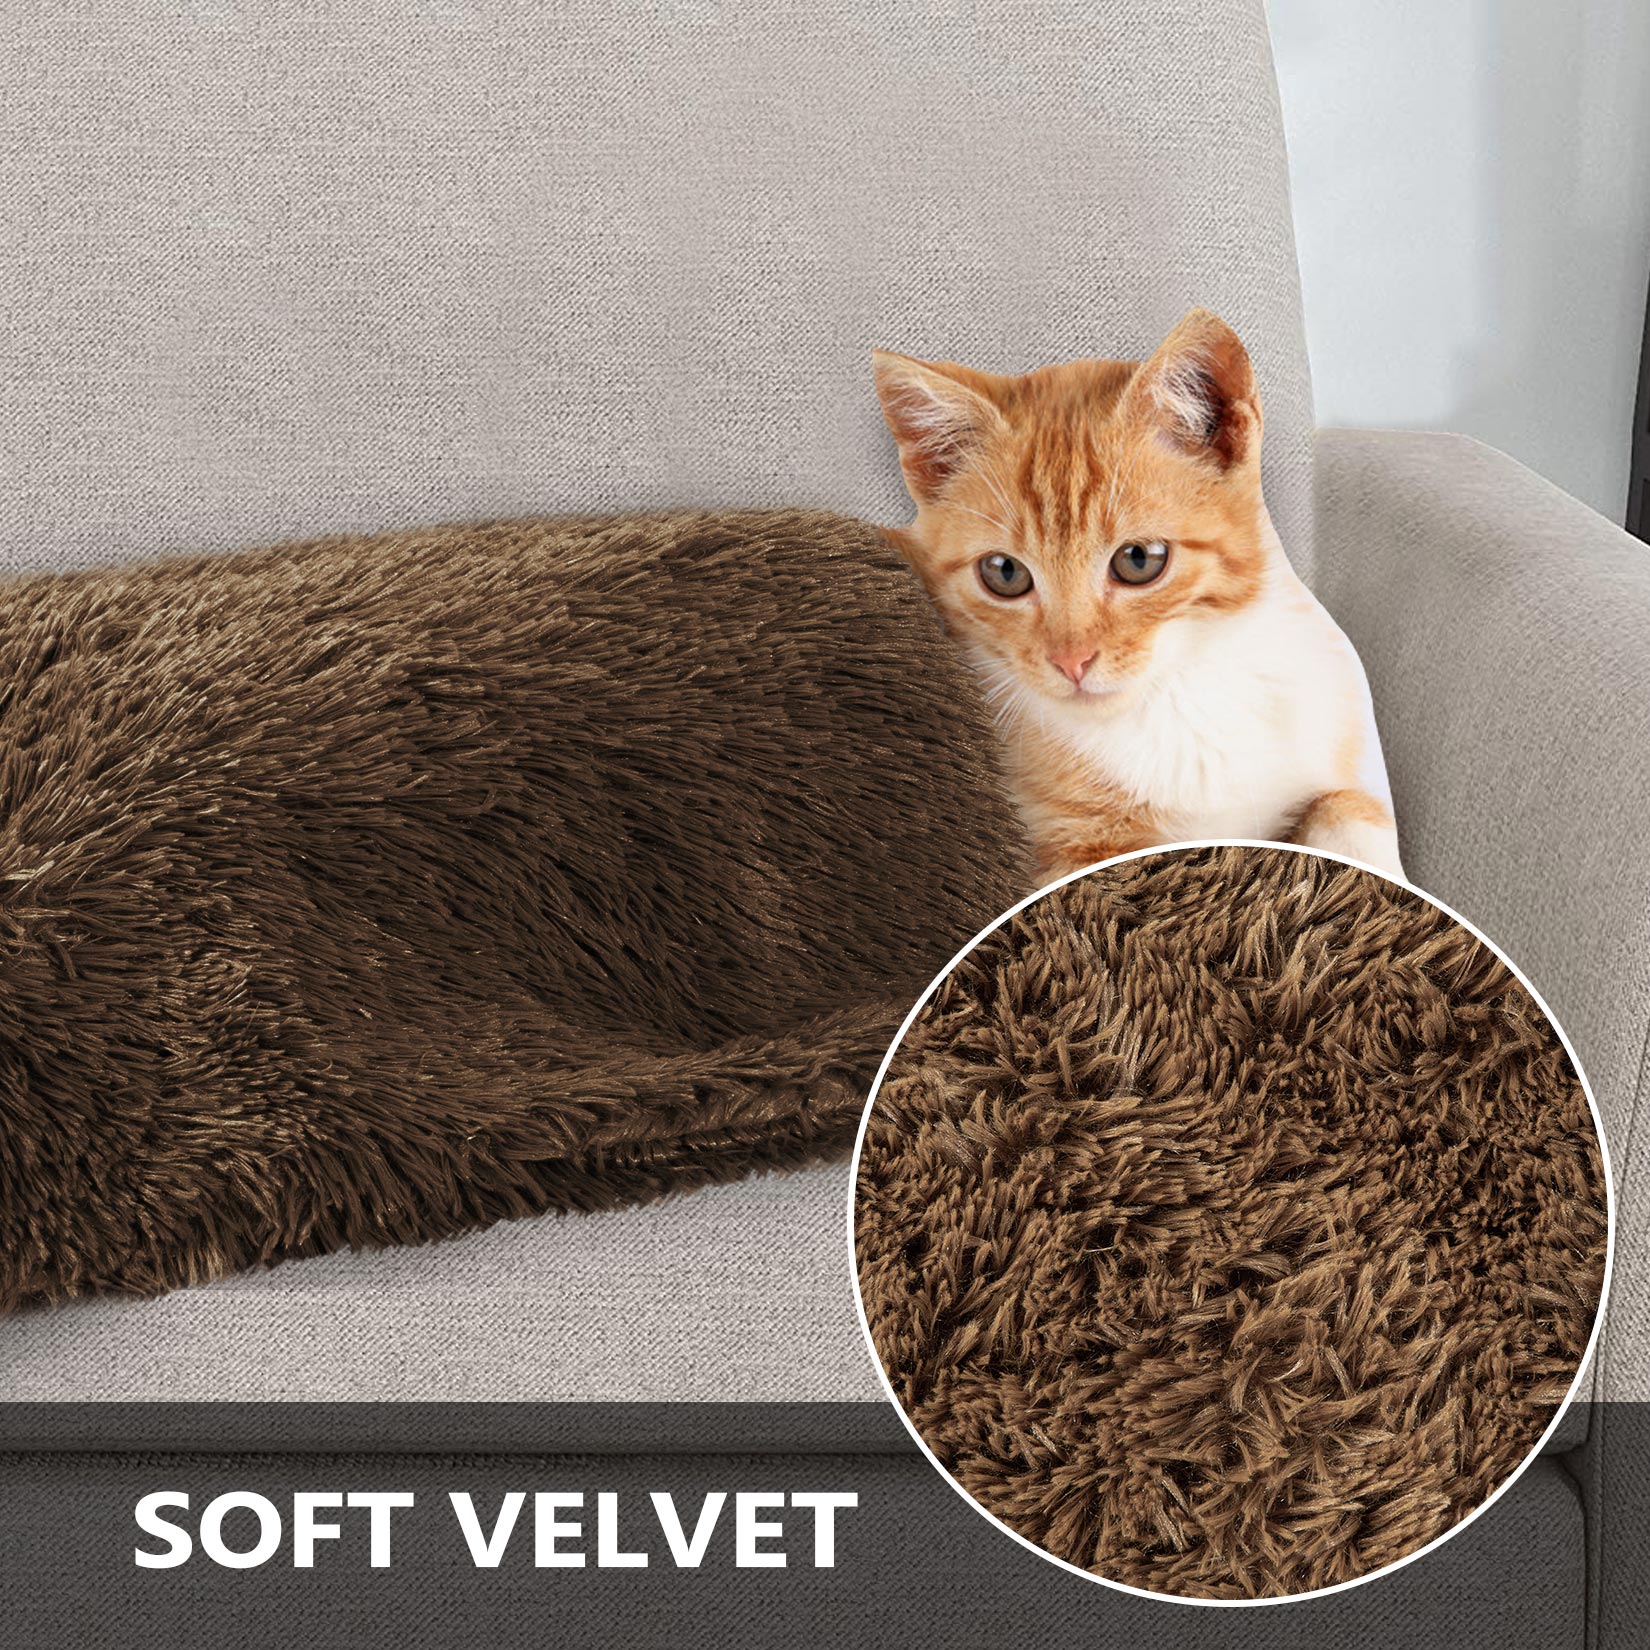 HA-EMORE Waterproof Dog Blanket for Bed Couch Sofa Soft Warm Fluffy Faux Fur Fleece Puppy Blankets Machine Washable Pet Blanket Brown 60×80cm - image 3 of 4